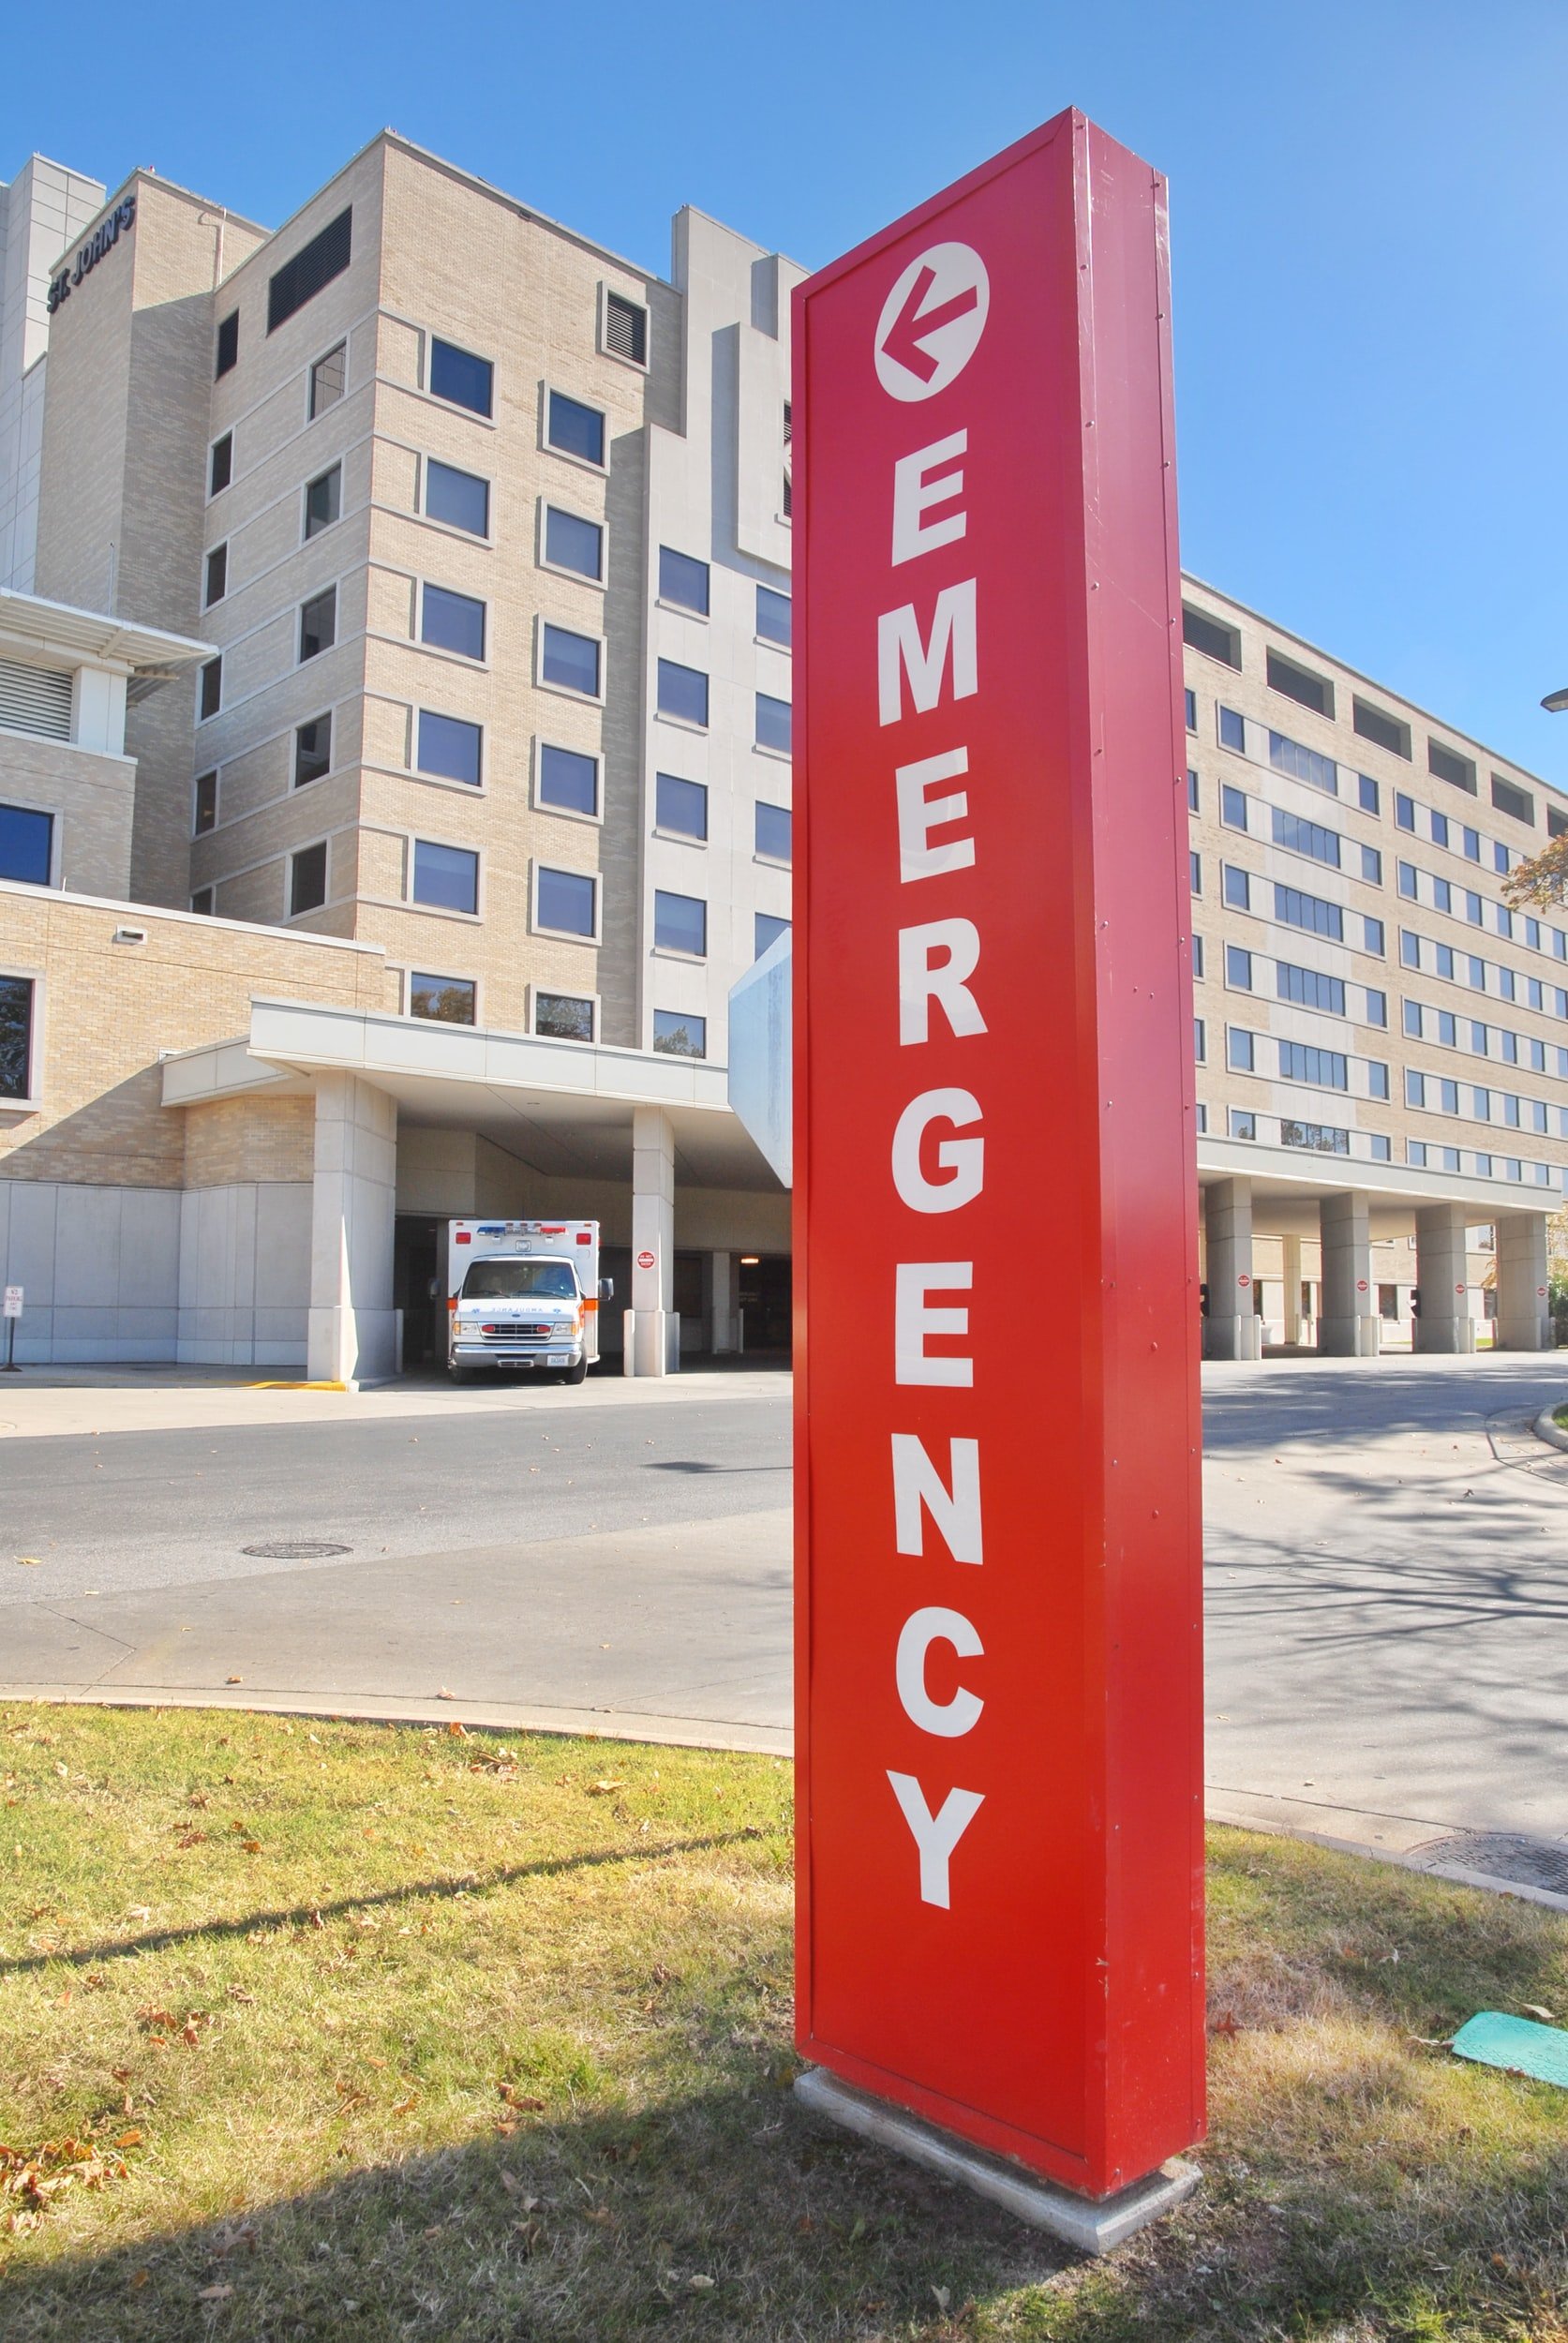 A red signs reads ‘emergency’ in white writing. There is a building and an ambulance behind the sign.